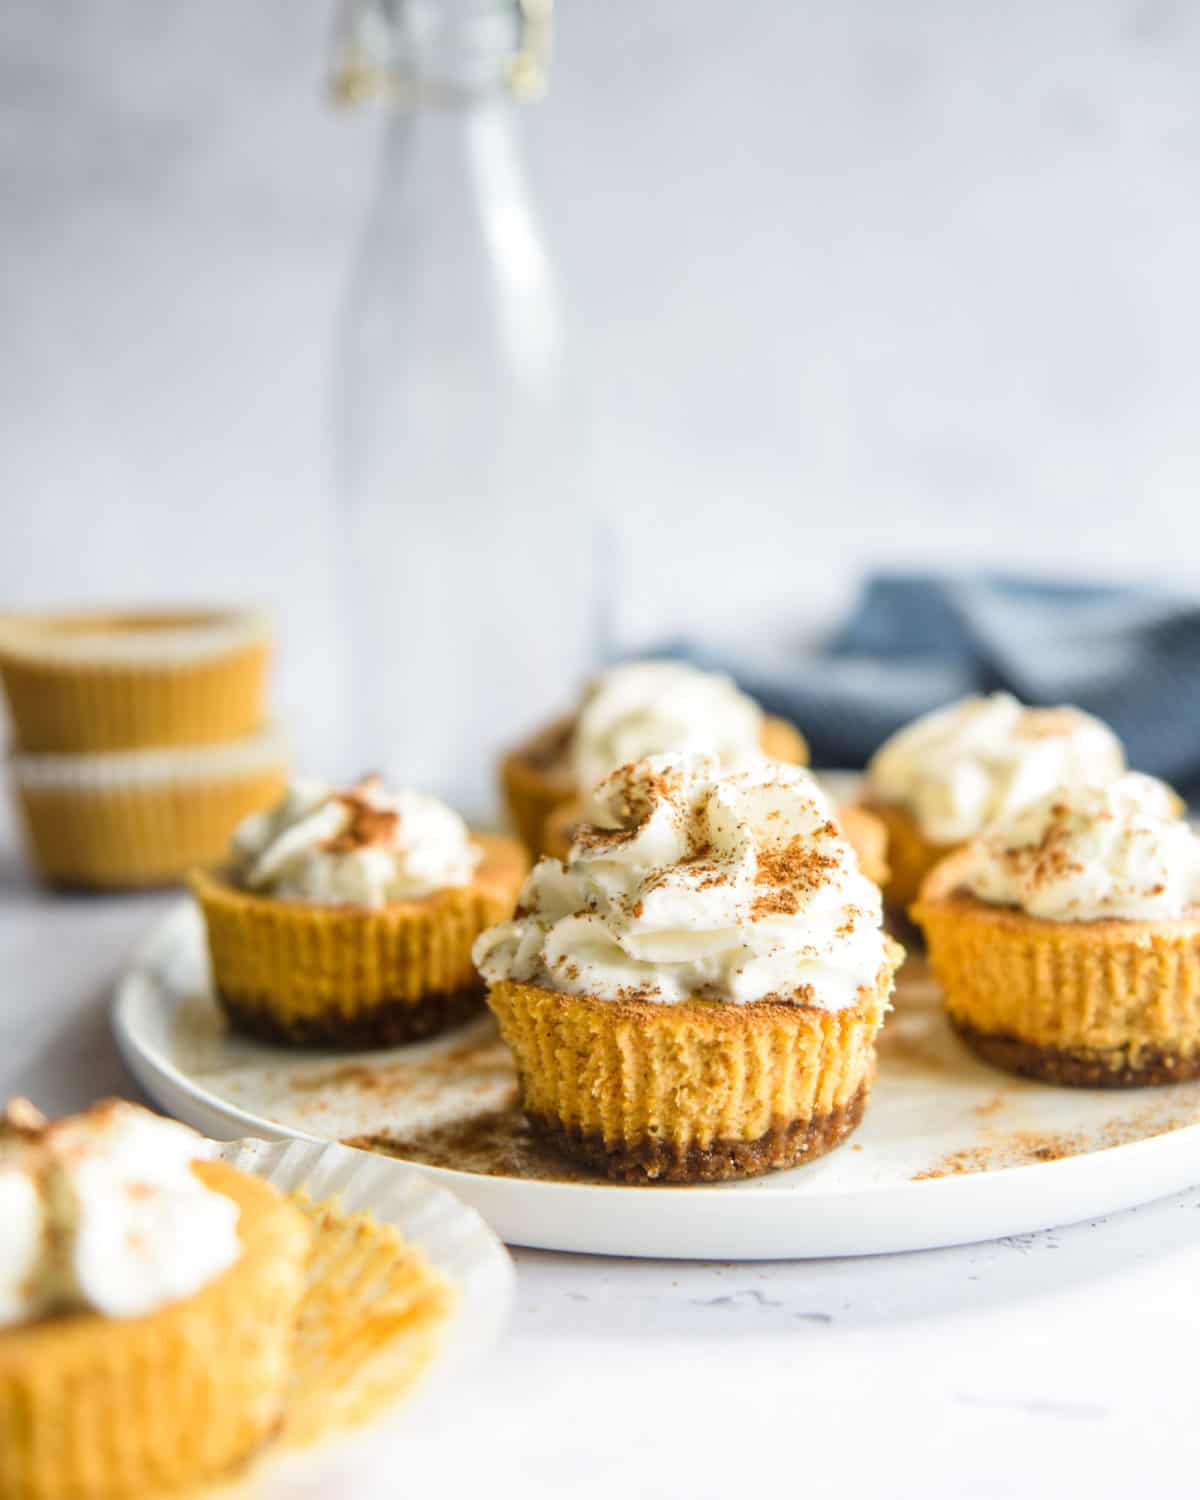 Cinnamon sprinkled on top of whipped cream on top of mini cheesecakes.